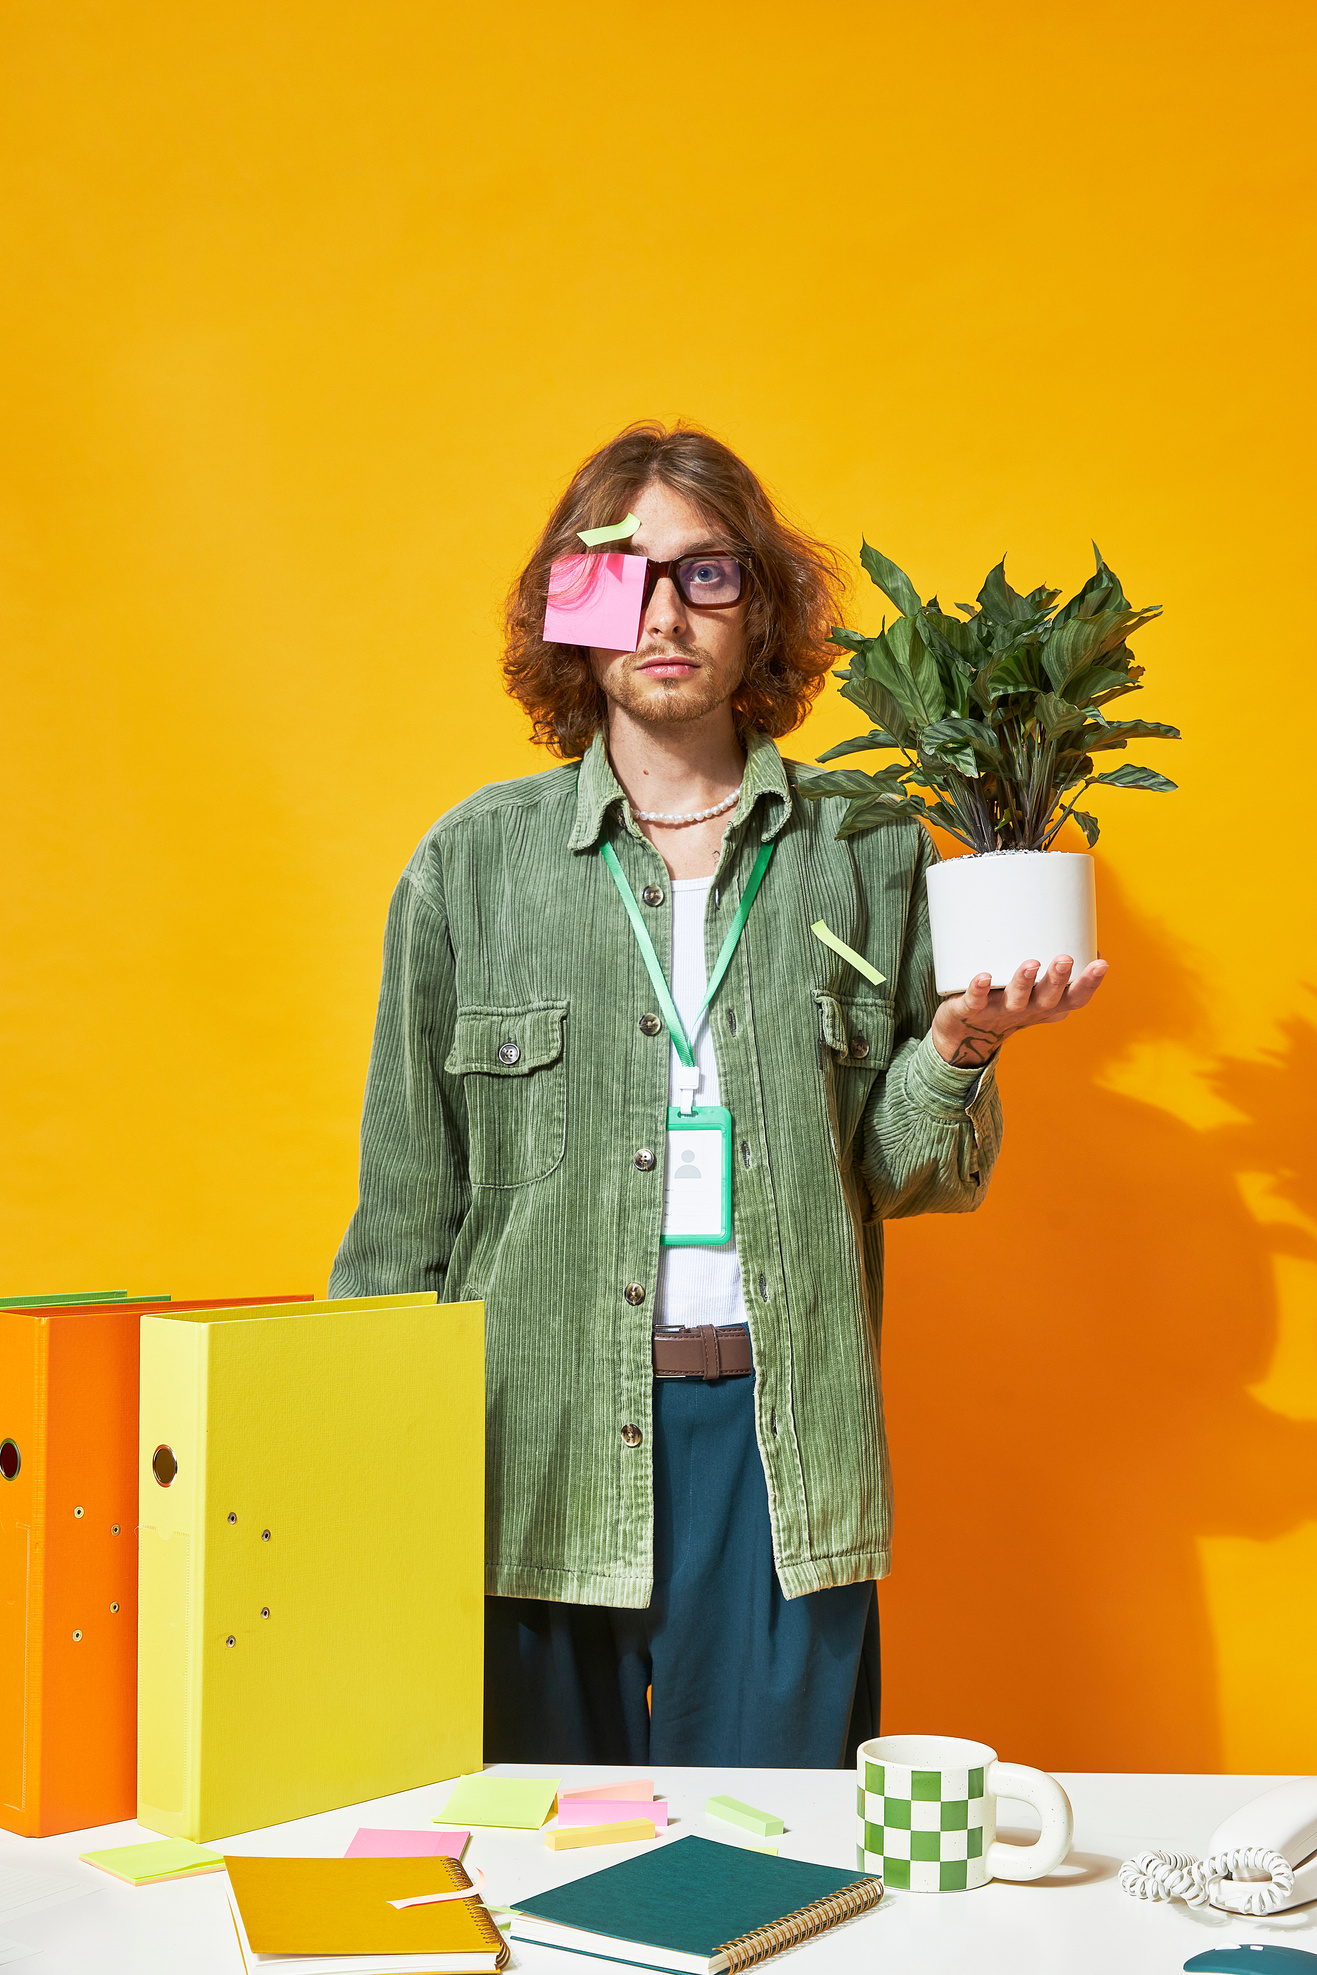 Man Holding an Office Plant in a Bright Yellow Office